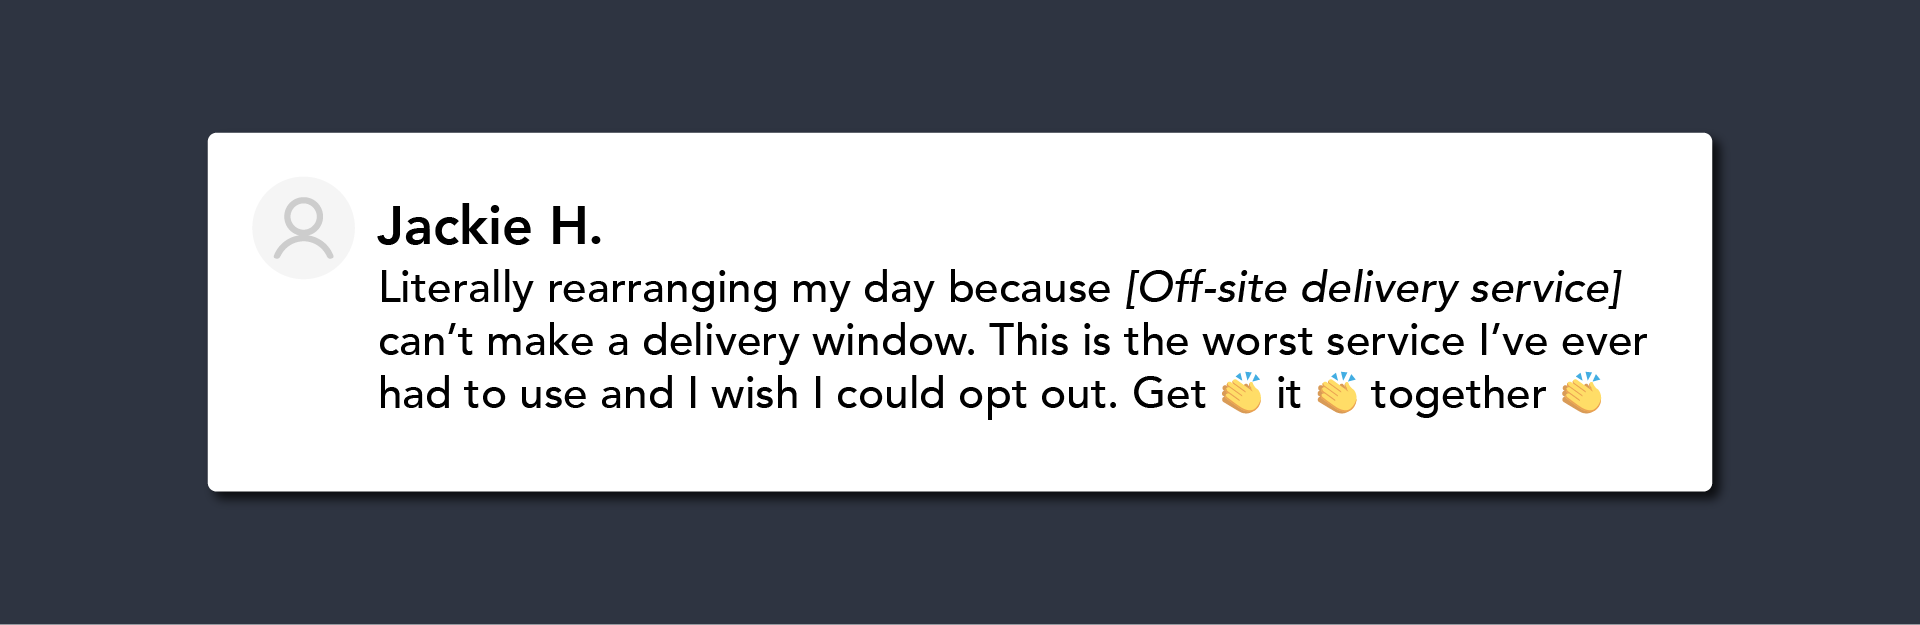 A tweet from Jackie H. that reads: "Literally rearranging my day because [Off-site delivery service] can't make a delivery window. This is the worst service I've ever had to use and I wish I could opt out. Get [clapping hands emoji] it [clapping hands emoji] together [clapping hands emoji"